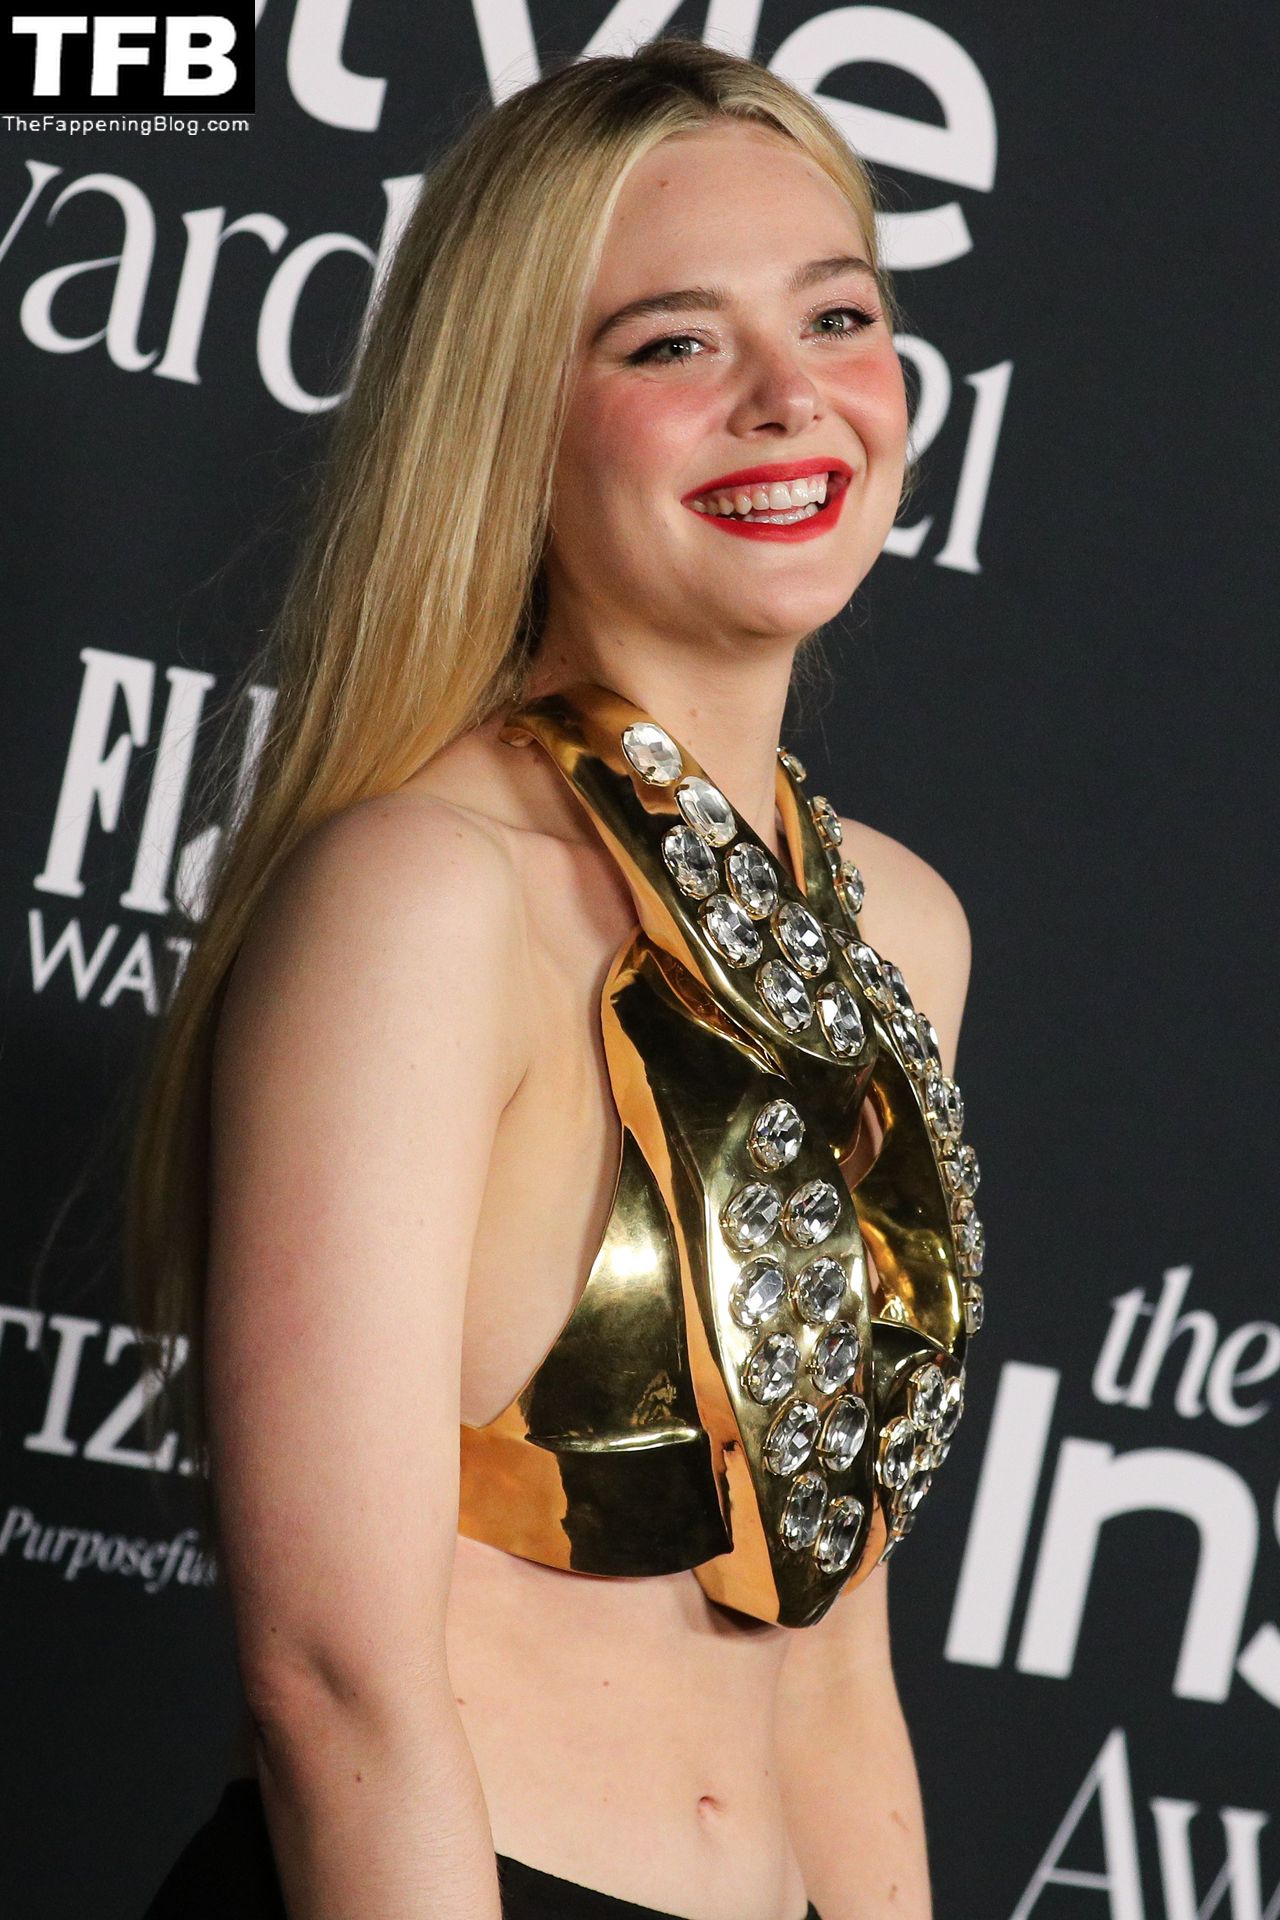 Elle-Fanning-Sexy-Braless-The-Fappening-Blog-89.jpg